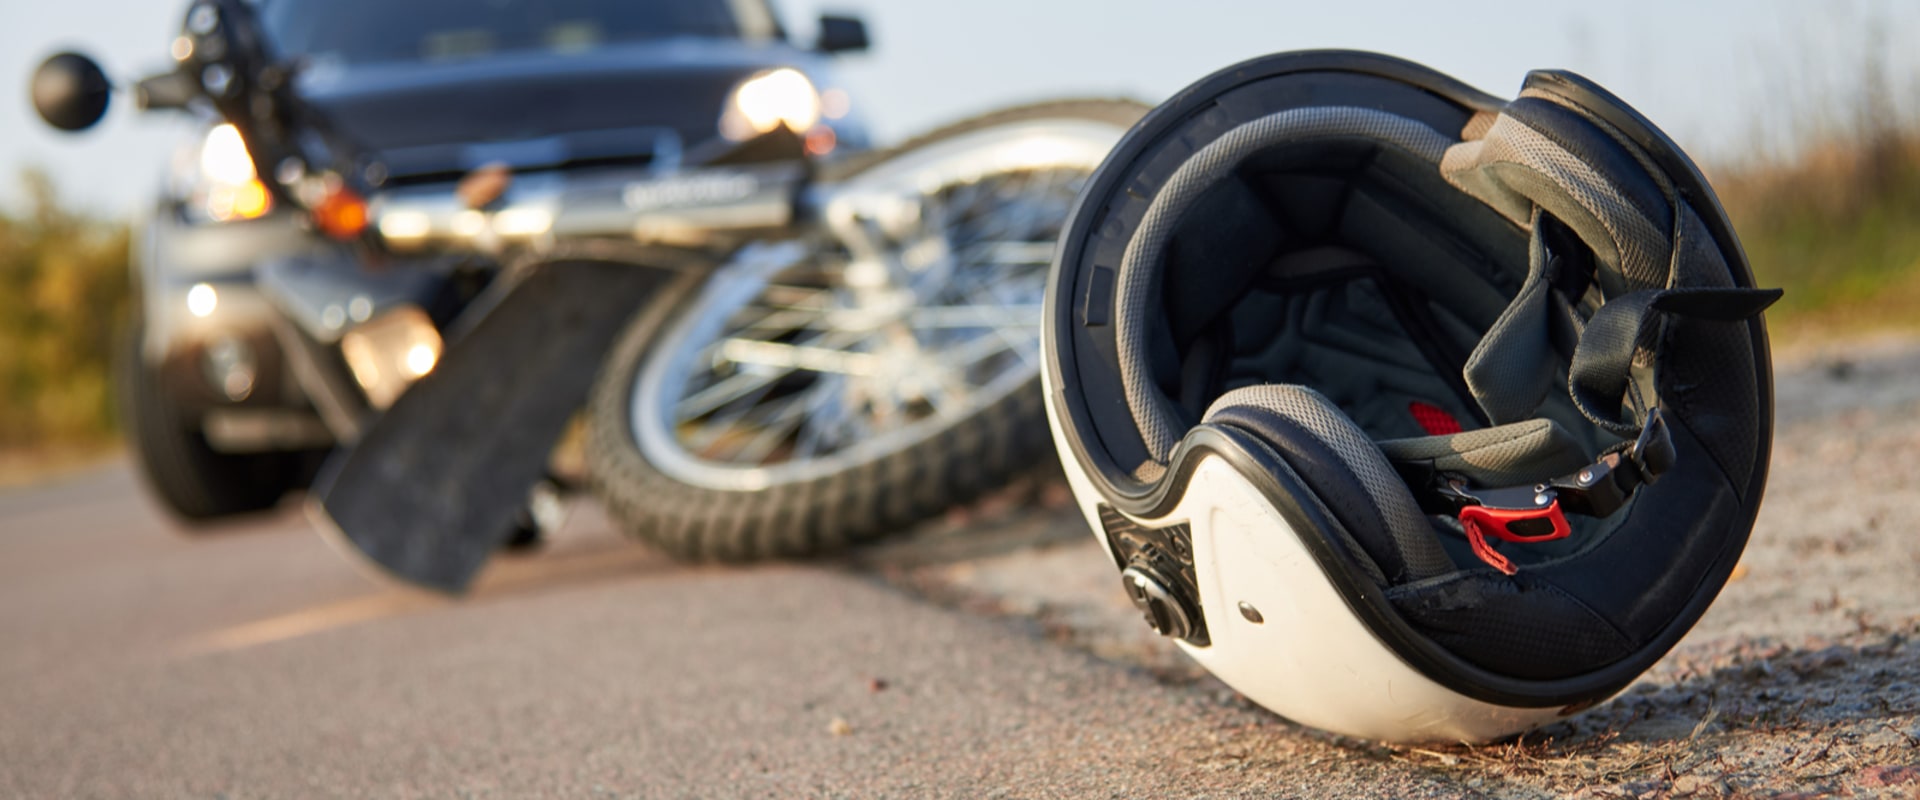 Motorcycle Accident Claims for Concussion